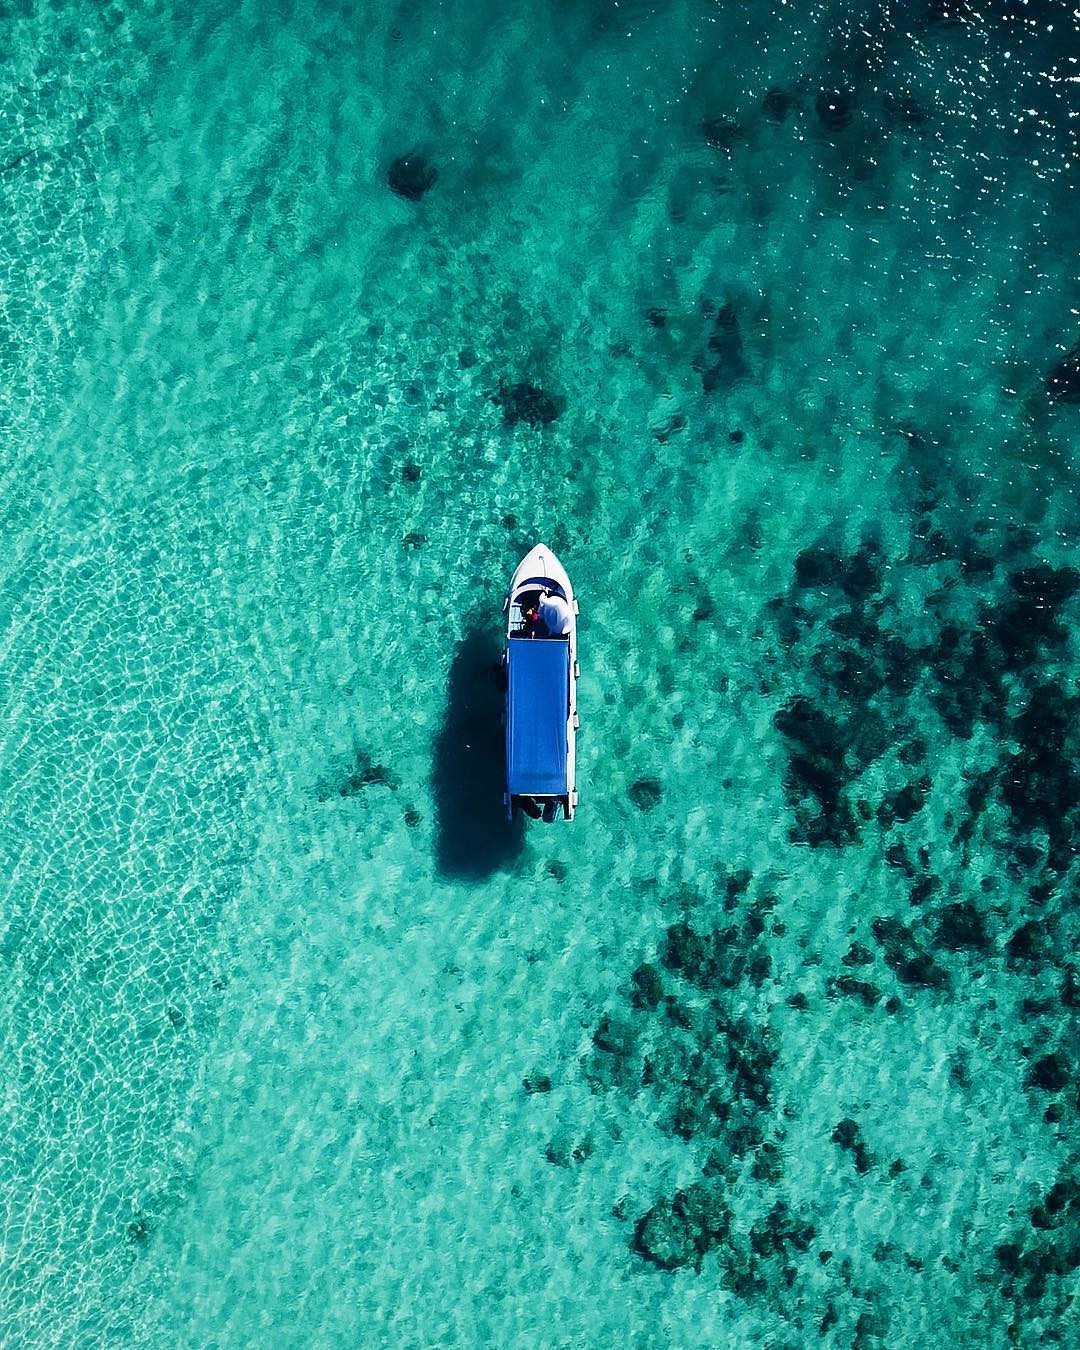 Redang Island in Malaysia is the ideal place for snorkelling, with Taaras Beach & Spa Resort’s white-sand beaches offering private access to shallow, turquoise waters packed with multicoloured fish. Photo: Instagram @kkcity